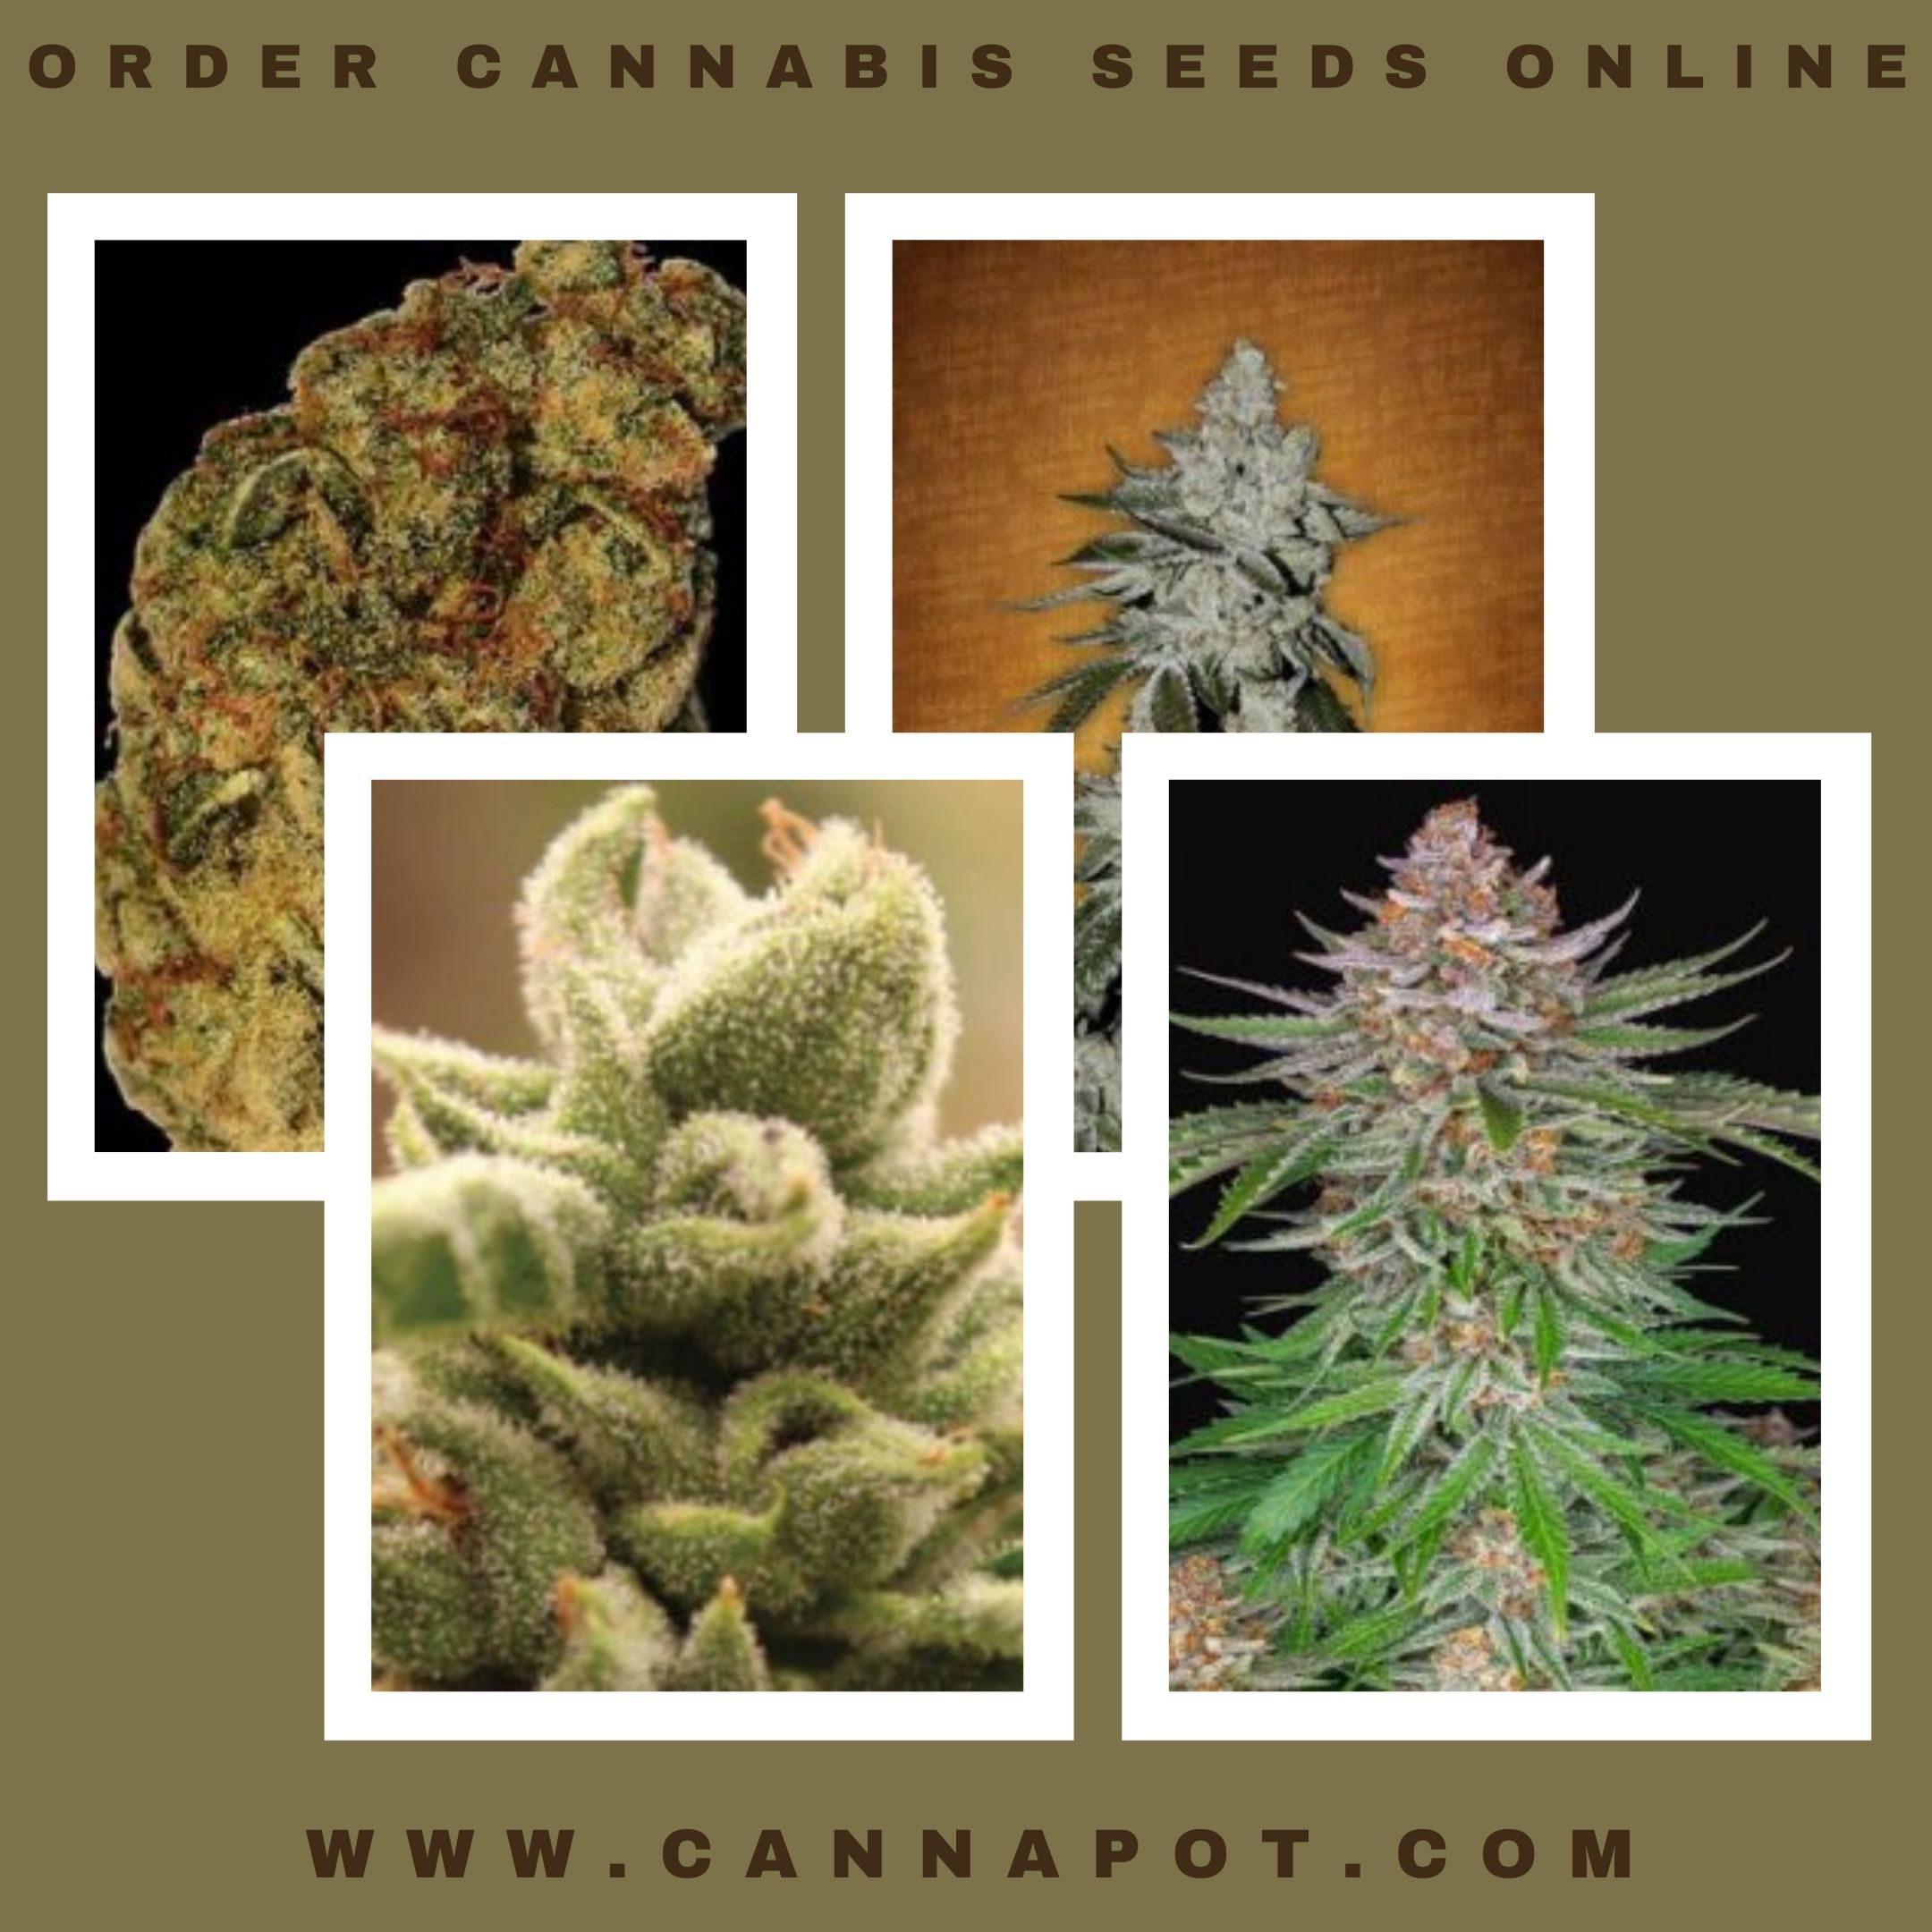 Order cannabis seeds online.jpg  by Cannapot